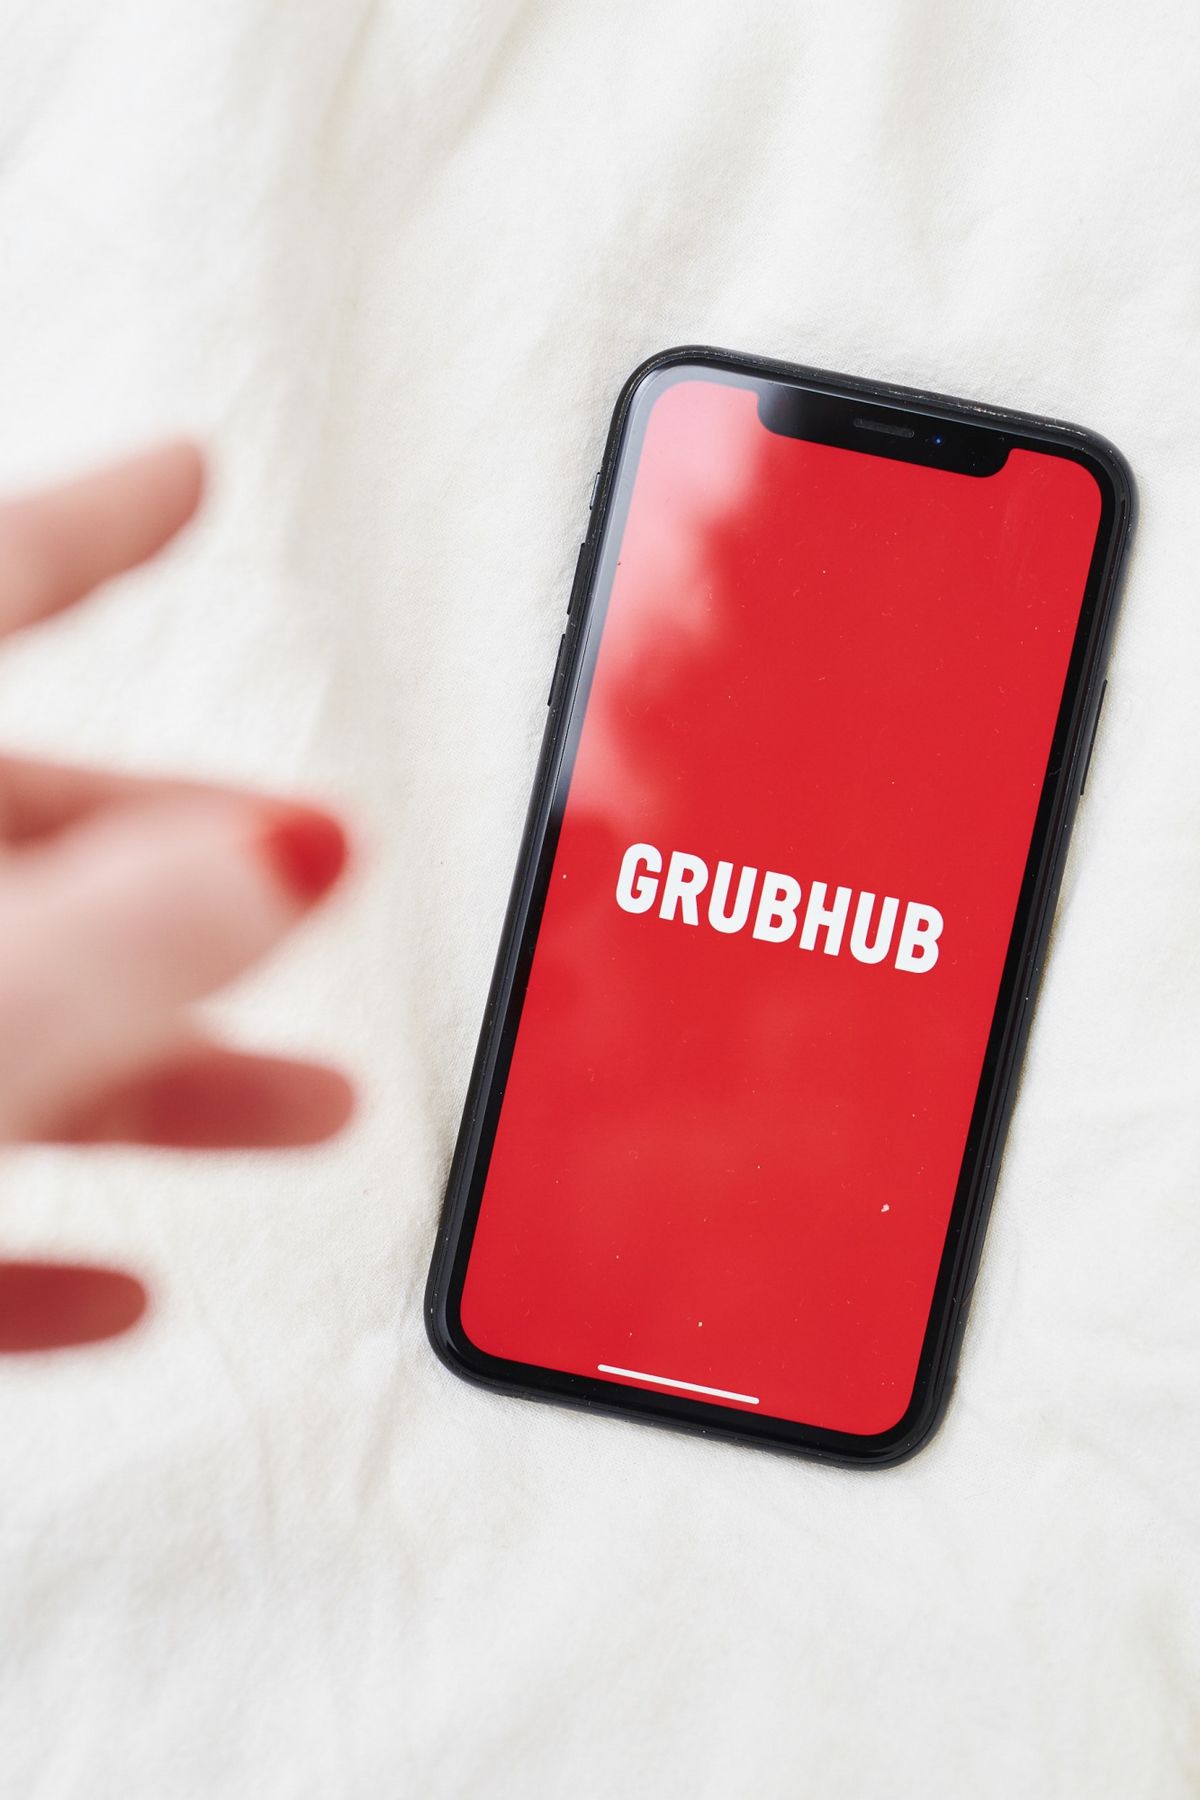 What Amazon and Grubhub Get From a Partnership